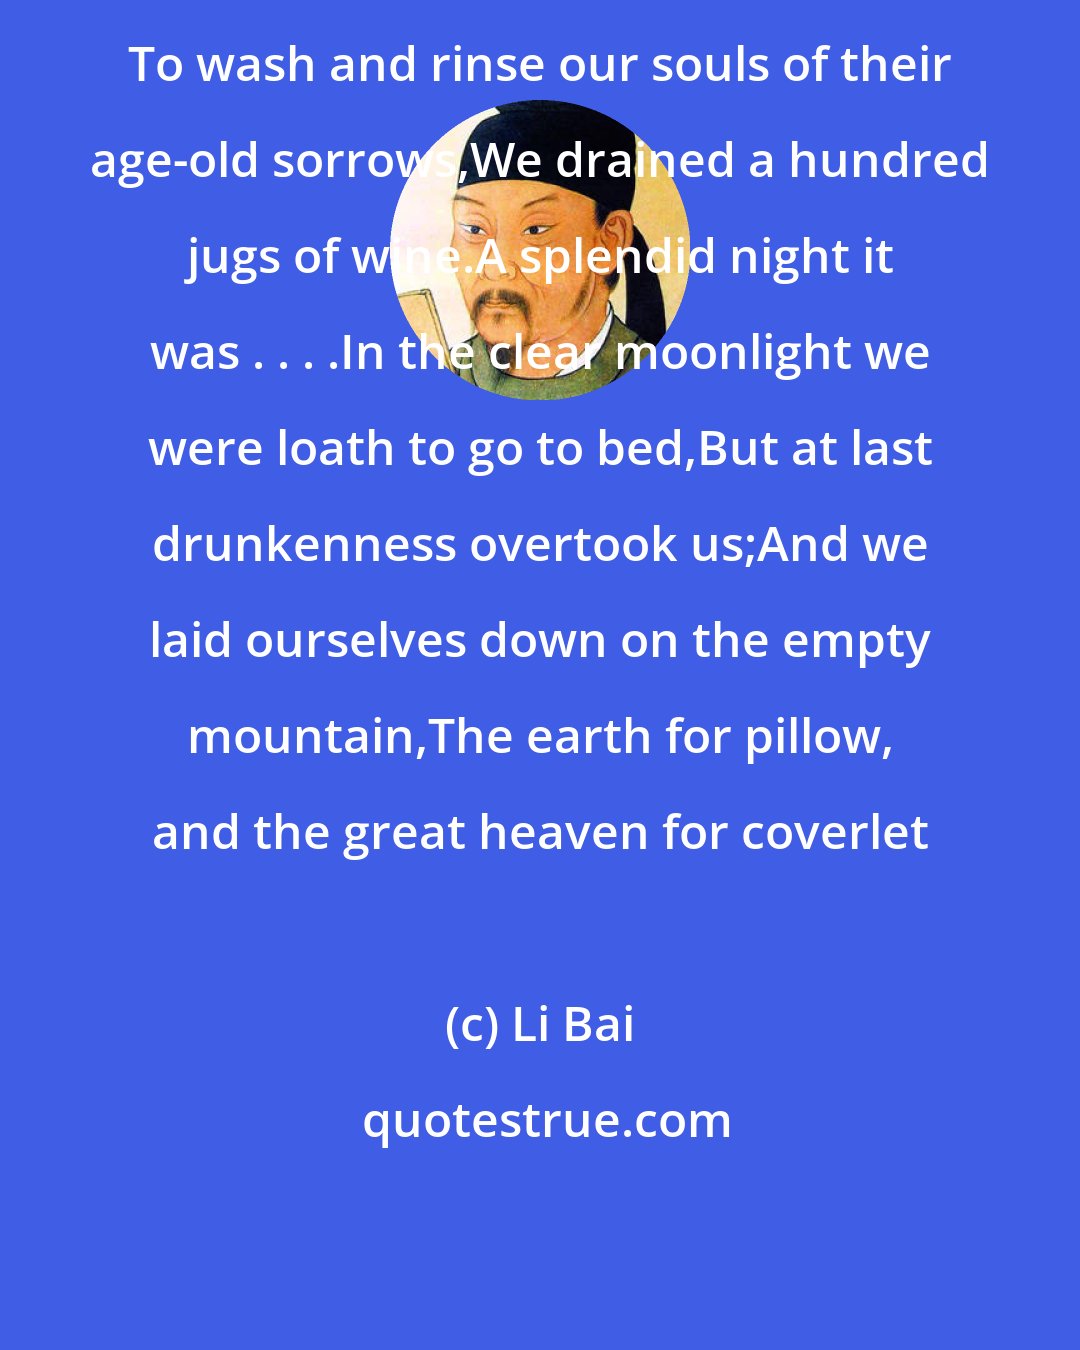 Li Bai: To wash and rinse our souls of their age-old sorrows,We drained a hundred jugs of wine.A splendid night it was . . . .In the clear moonlight we were loath to go to bed,But at last drunkenness overtook us;And we laid ourselves down on the empty mountain,The earth for pillow, and the great heaven for coverlet